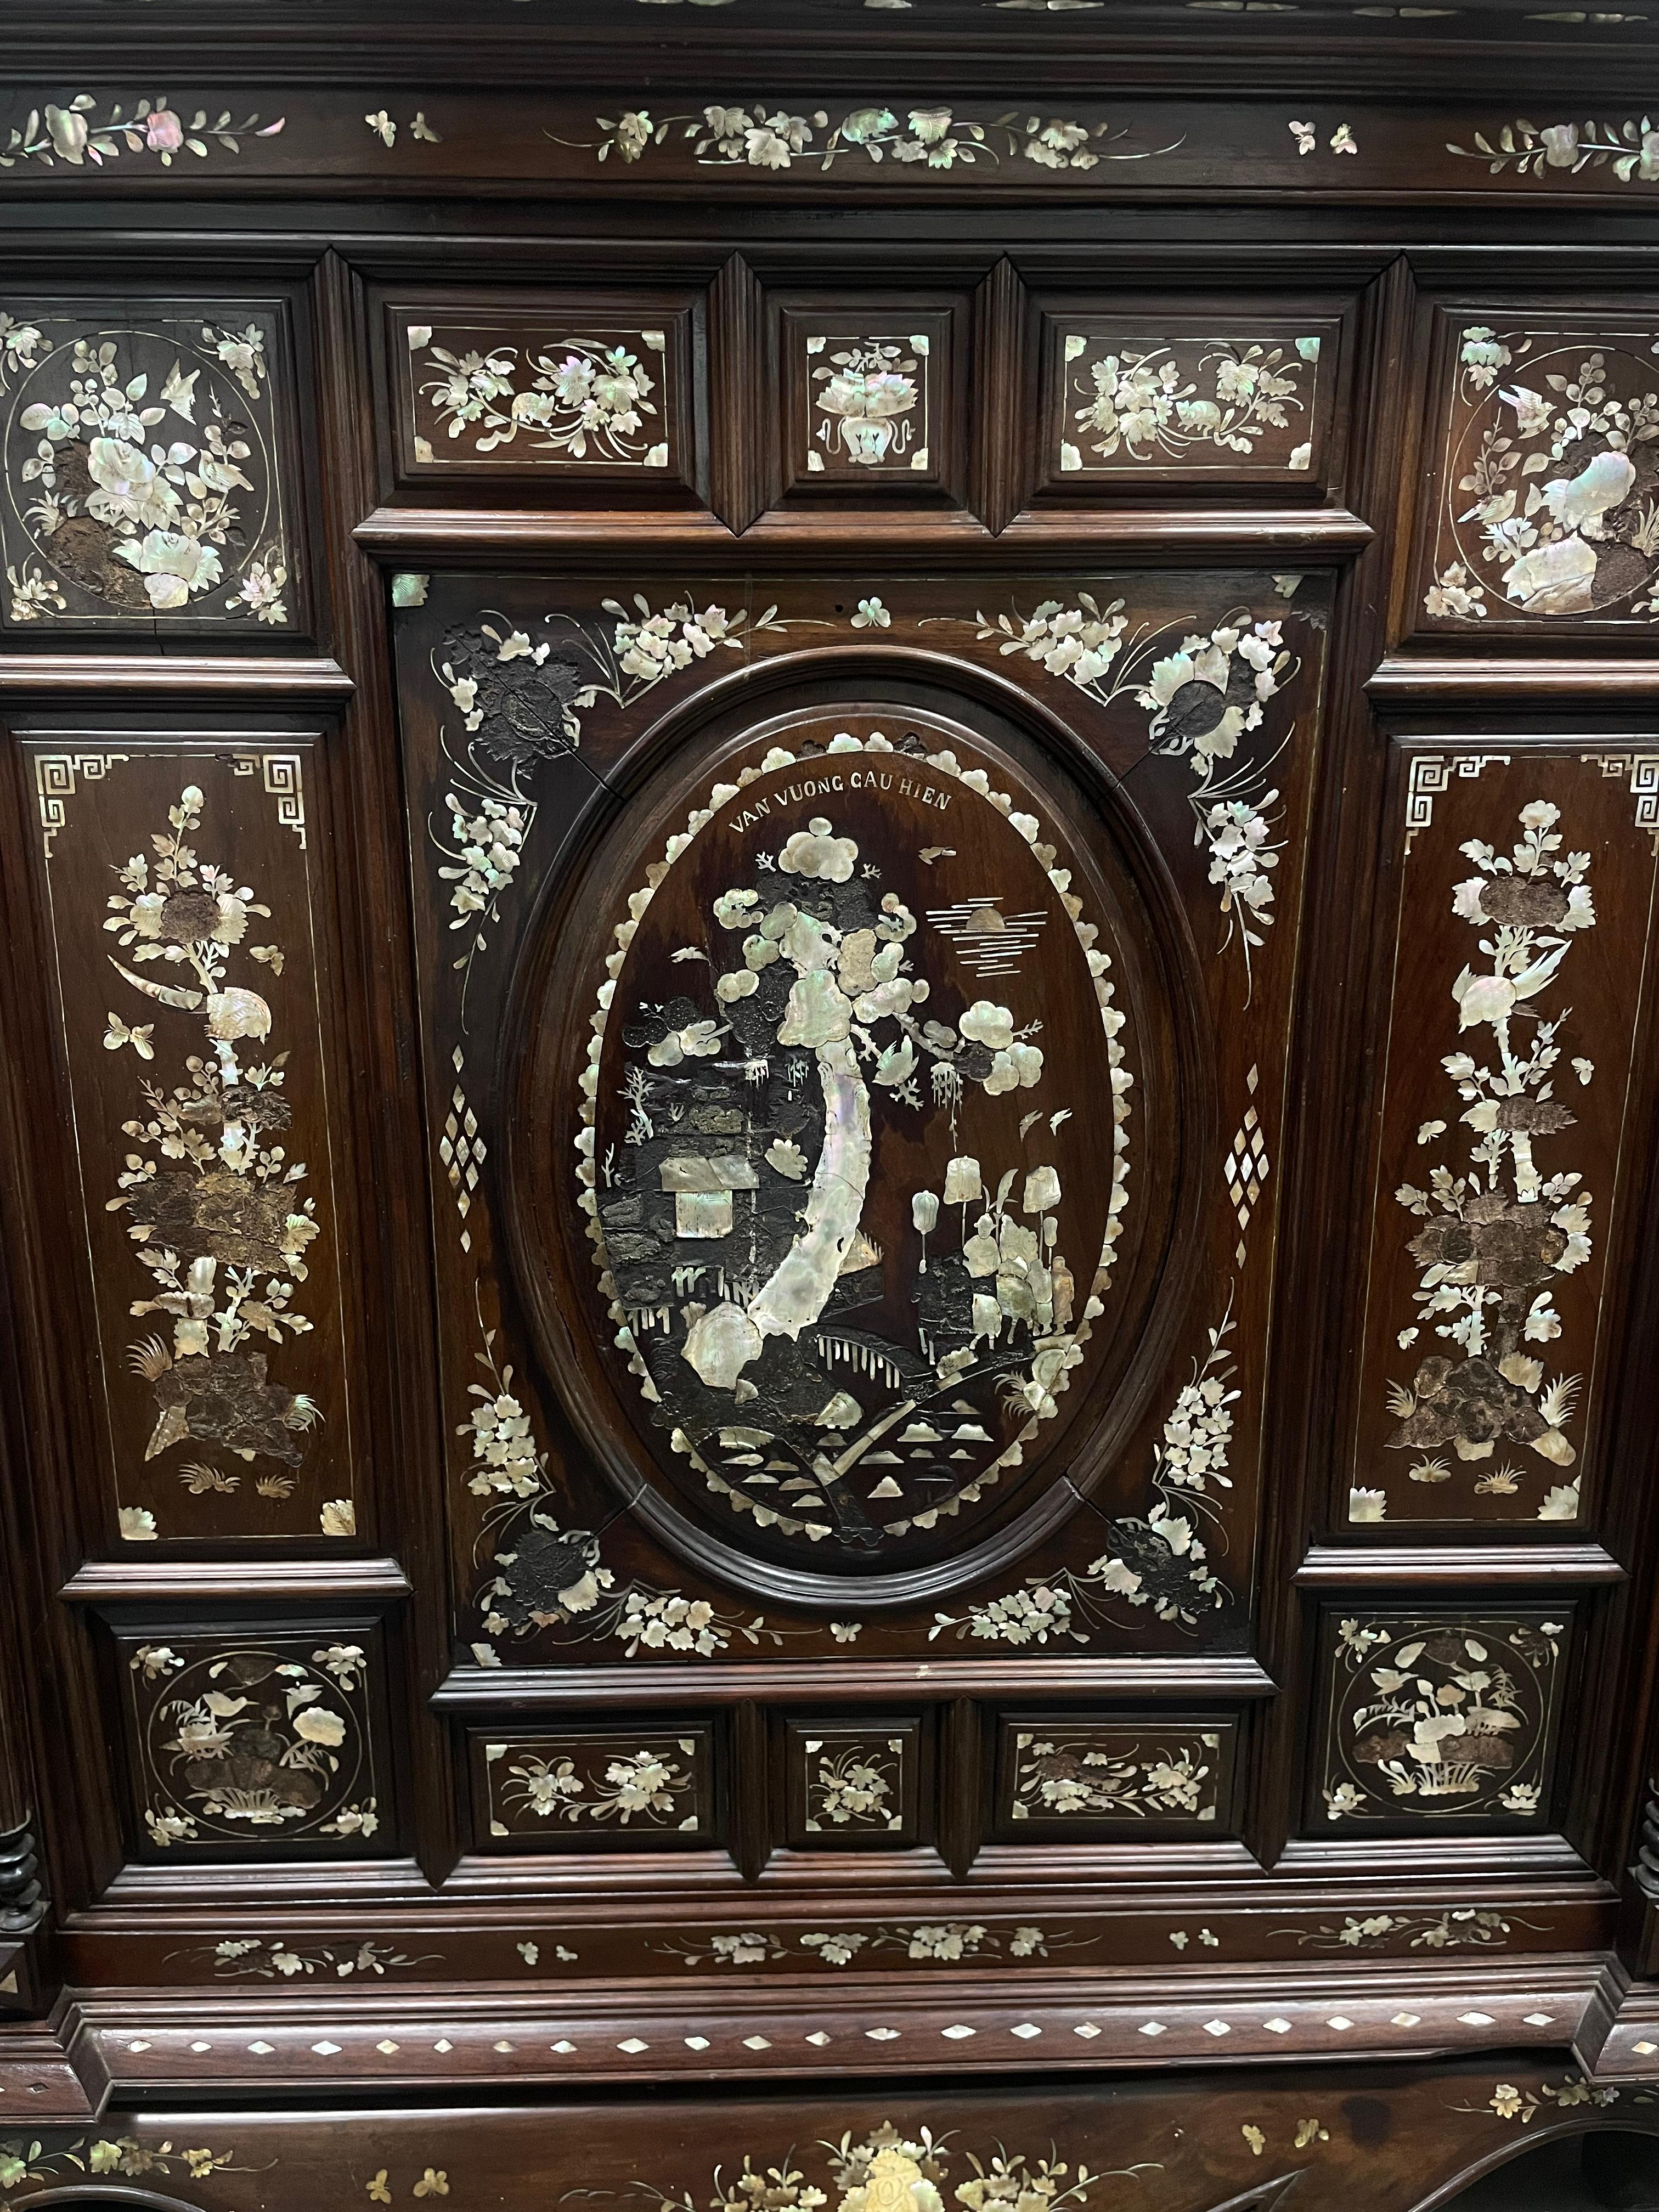 A Dutch Indonesian cabinet from the Mid-19th century. This piece is signed by Van Vuong Hien. It's made of special Rosewood with a Mother of Pearl Abalone inlay. The textures and colors between the wood and the abalone bring a dancing energy to this